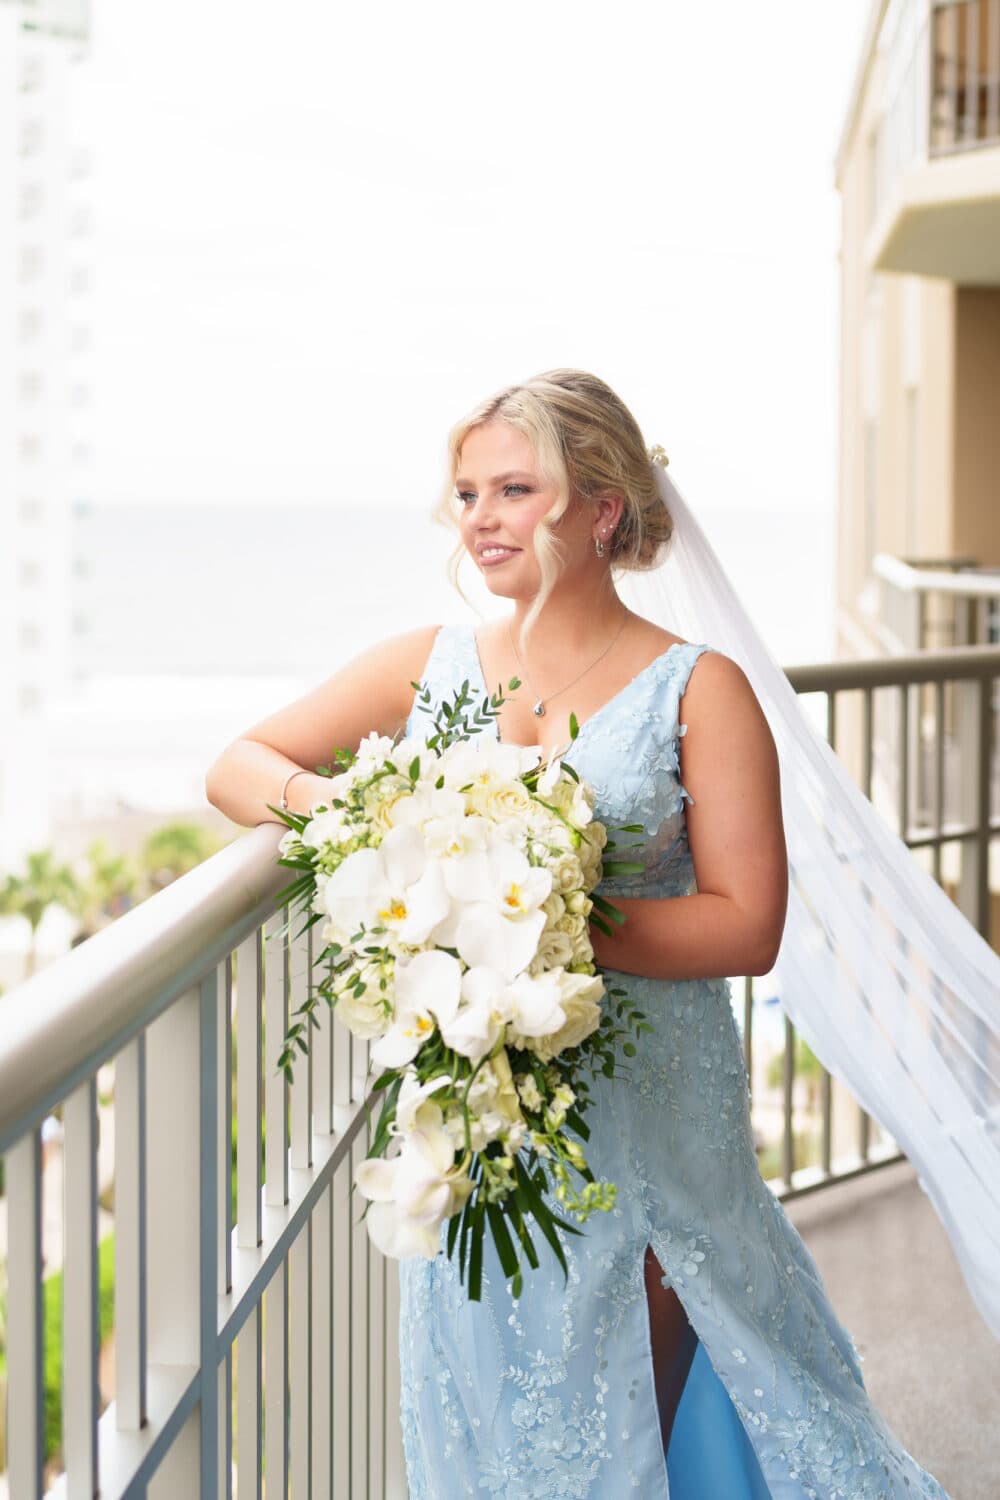 Bride looking out from the hotel balcony - Hilton Myrtle Beach Resort